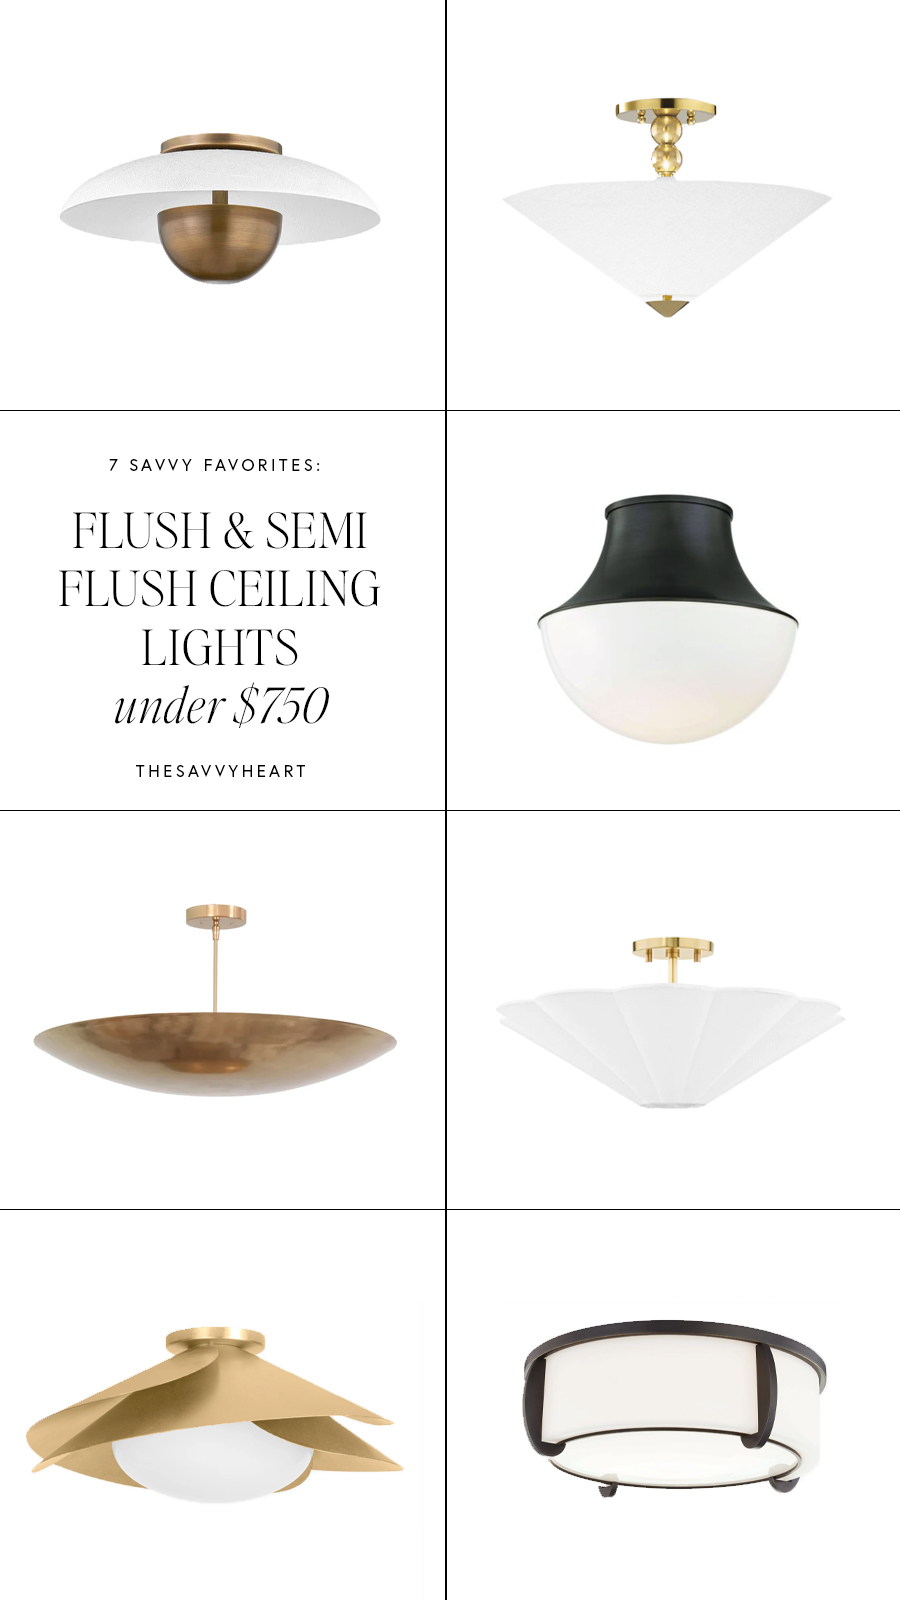 Searching for the perfect semi flush or flush lighting fixture? I rounded up 21 lights that are modern and transitional for every budget. See my designer picks.